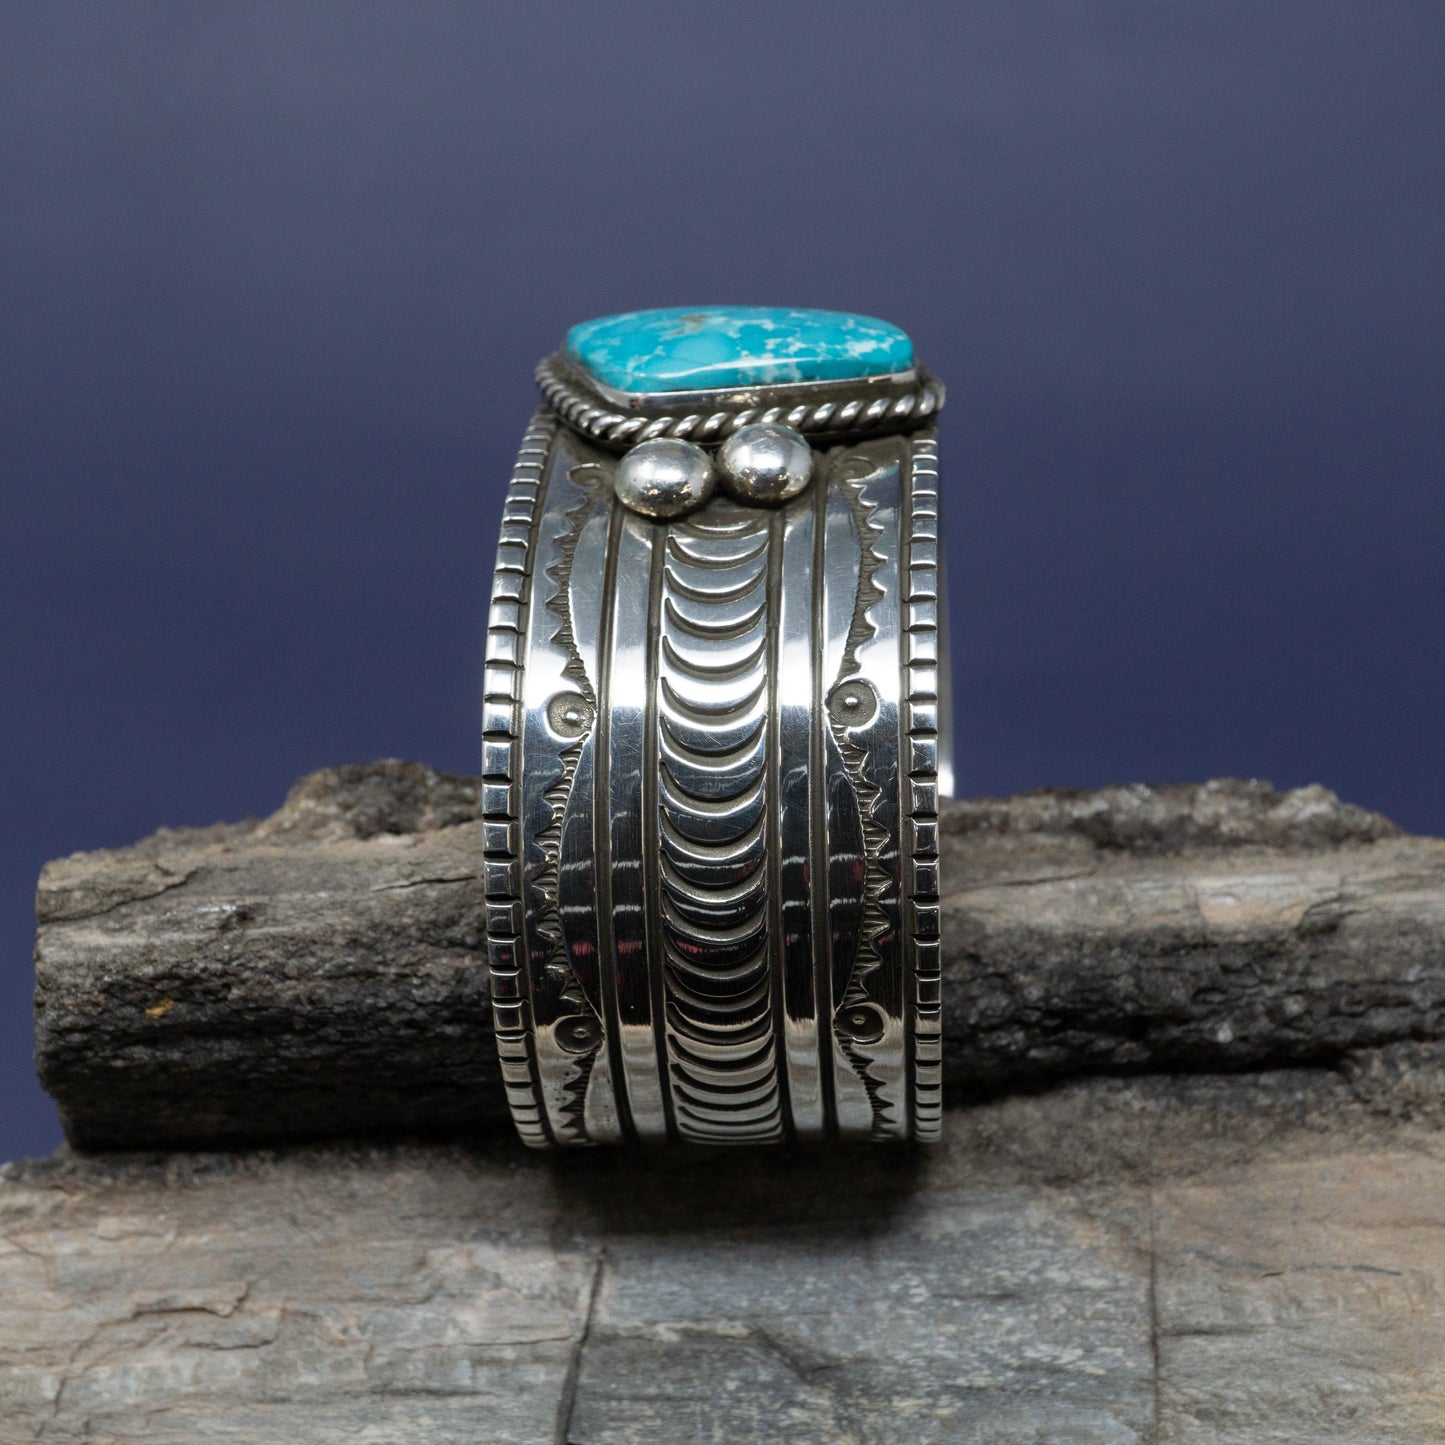 Navajo Stamped Sterling Silver Cuff with Birdseye Turquoise by Francis Melvin